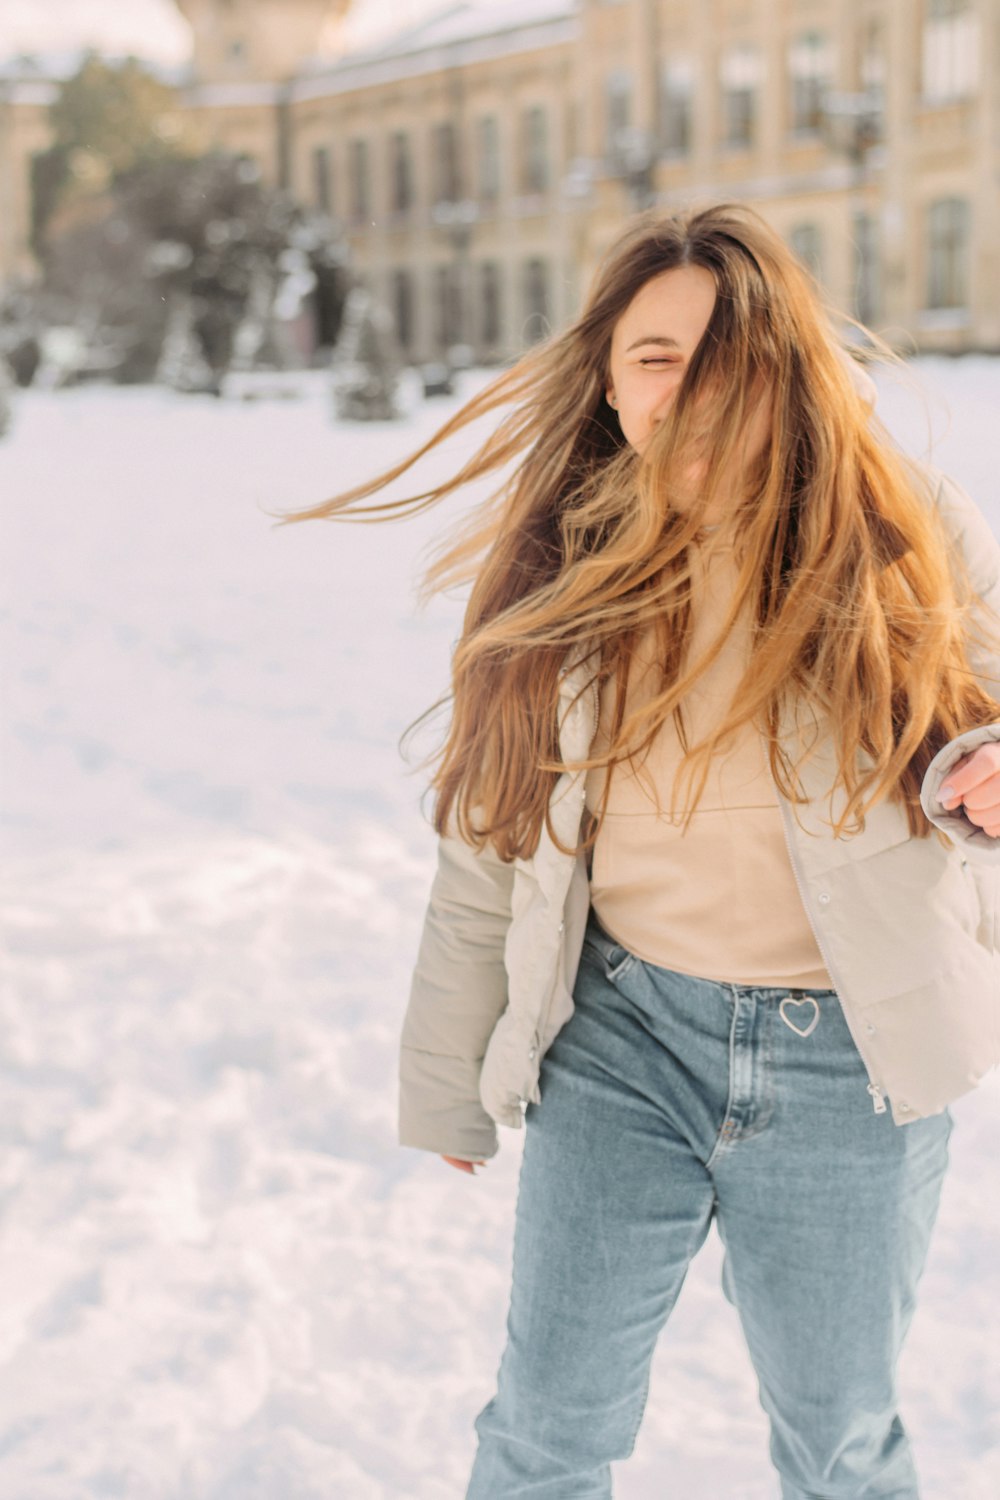 woman in white jacket and blue denim jeans standing on snow covered ground during daytime